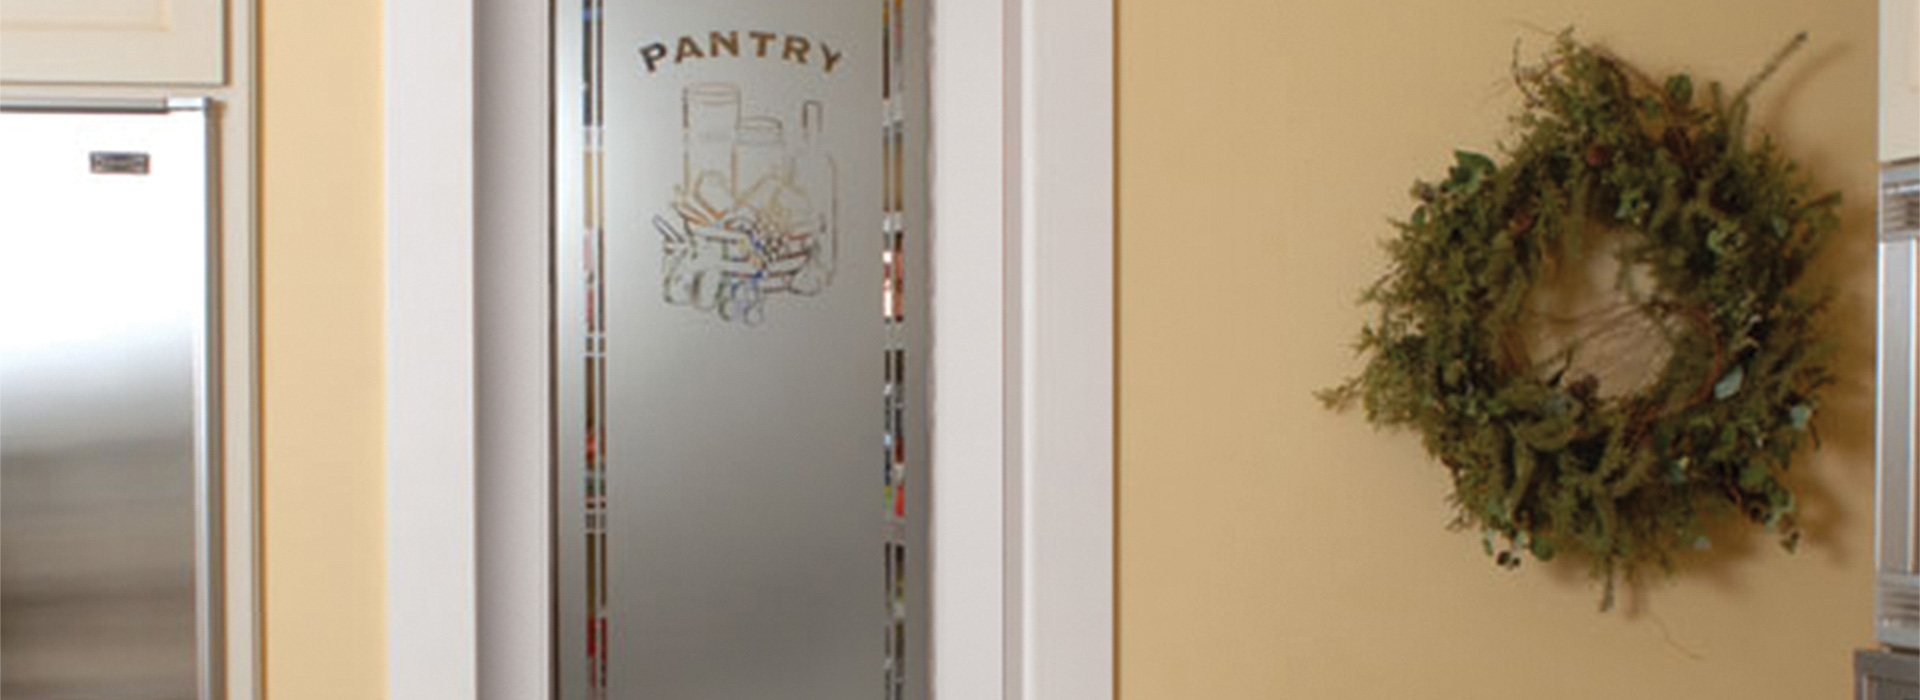 Close up shot of a yellow painted kitchen with an MDF primed decorative glass pantry door in the center, stainless steel fridge to the left, and green wreath to the right